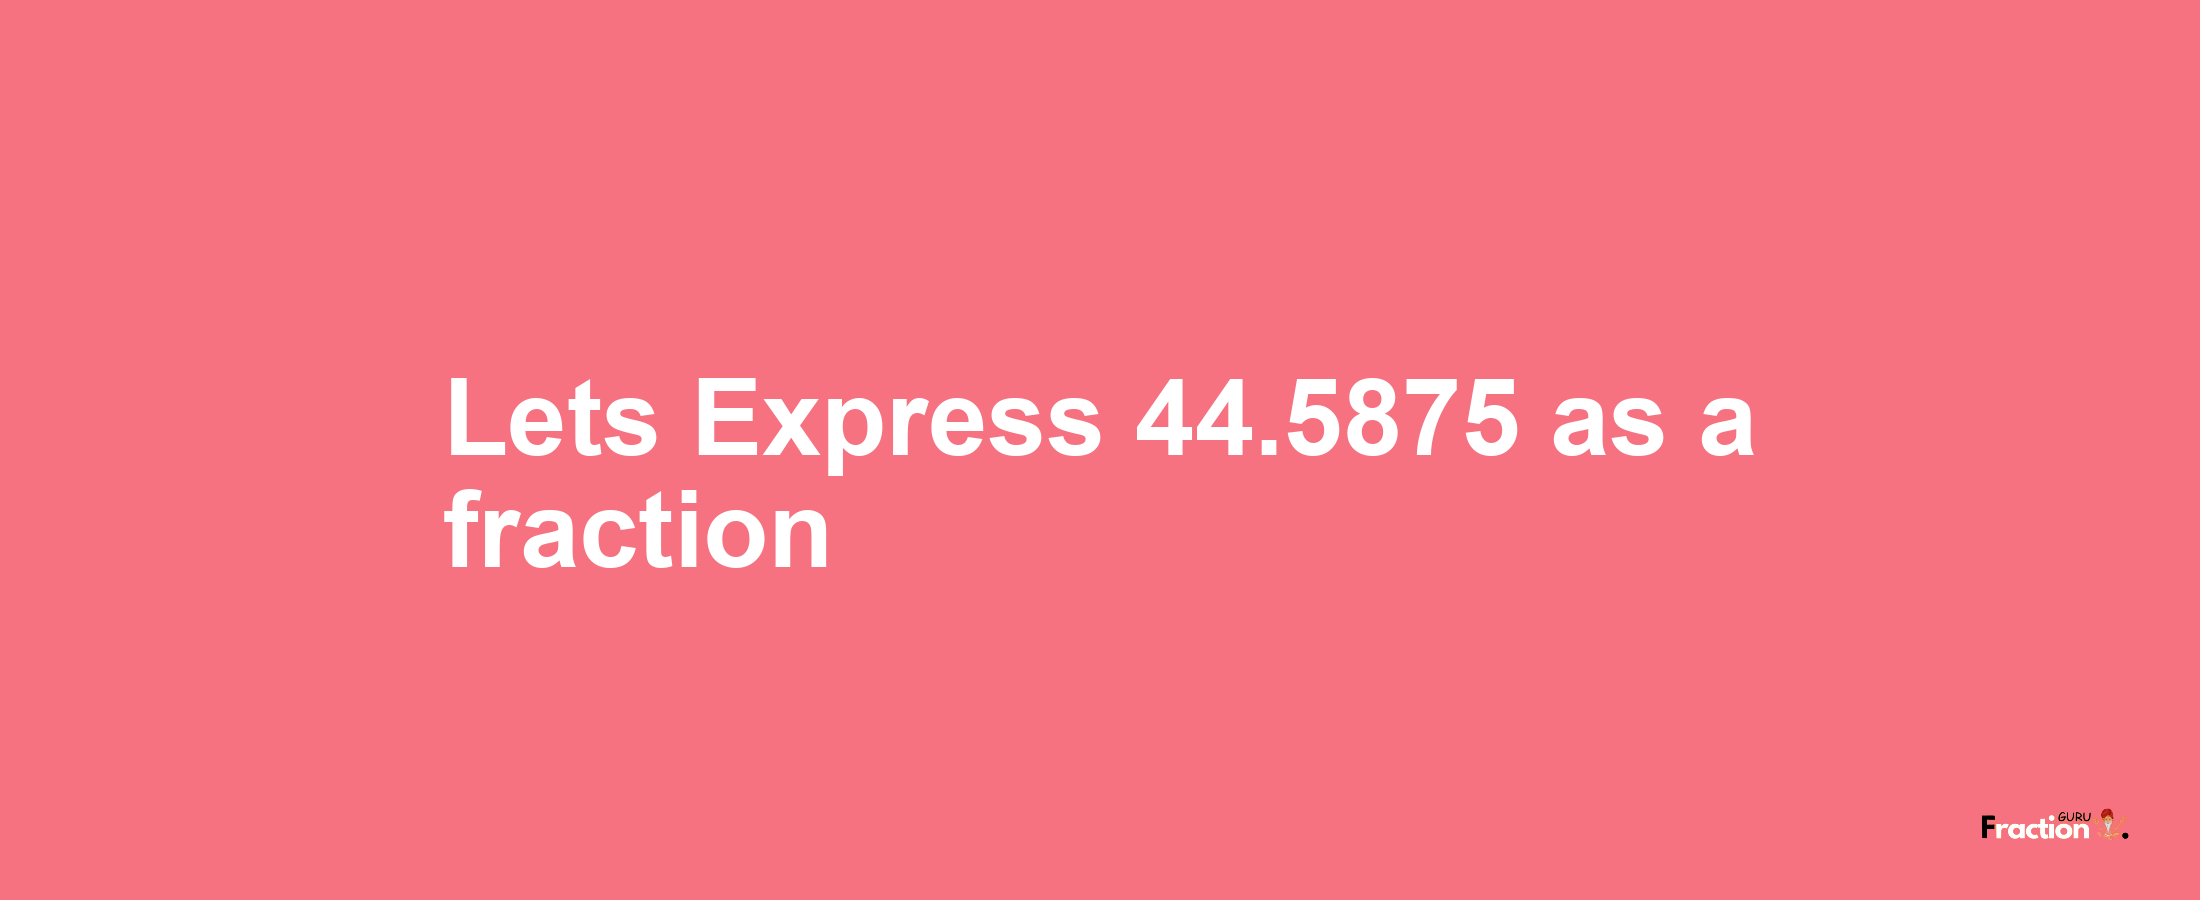 Lets Express 44.5875 as afraction